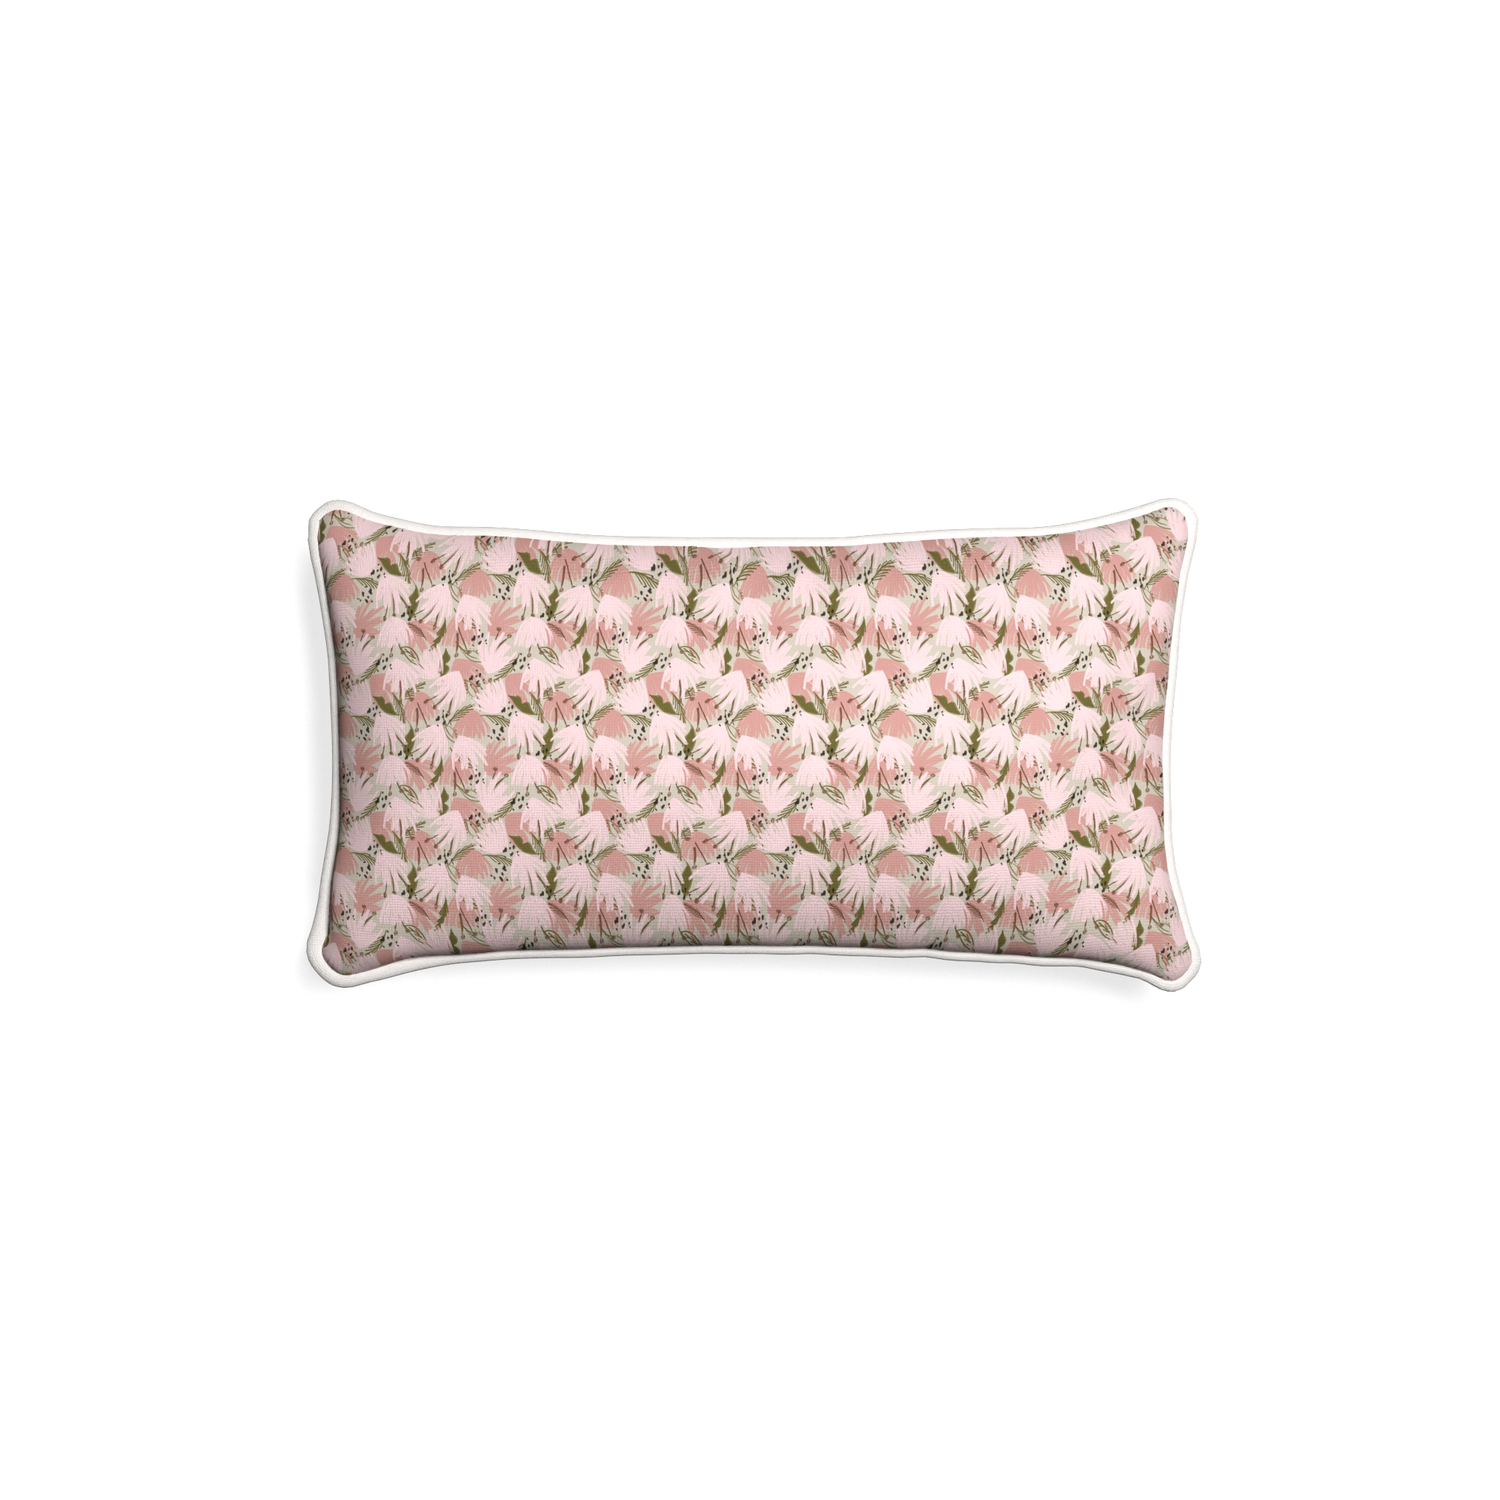 Petite-lumbar eden pink custom pink floralpillow with snow piping on white background